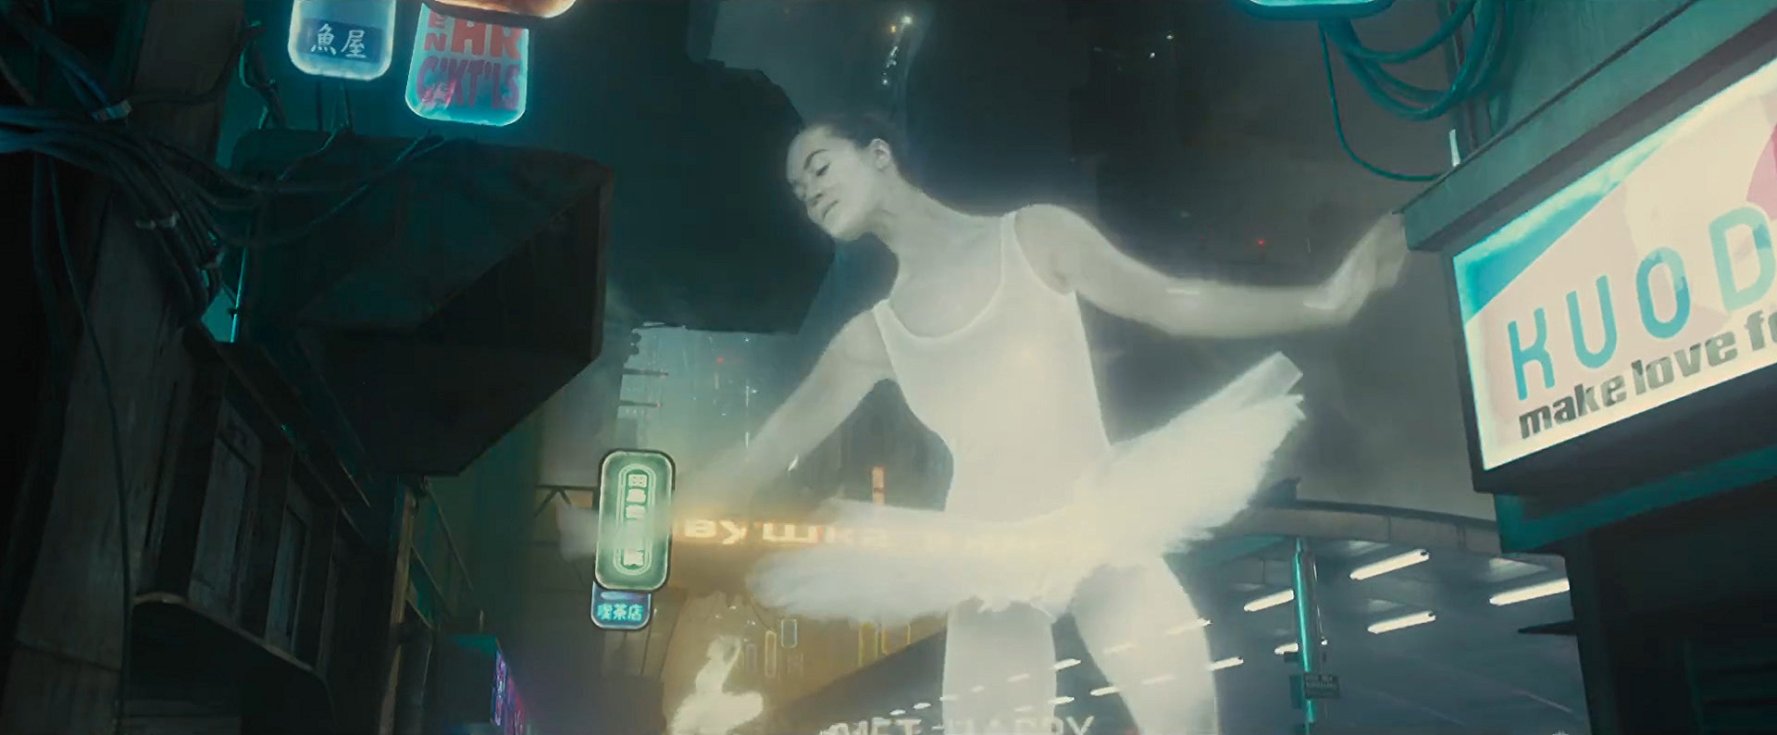 An advertisement for Russia featuring a huge holographic ballerina dancing while the words "Soviet Happy" circle around her legs.